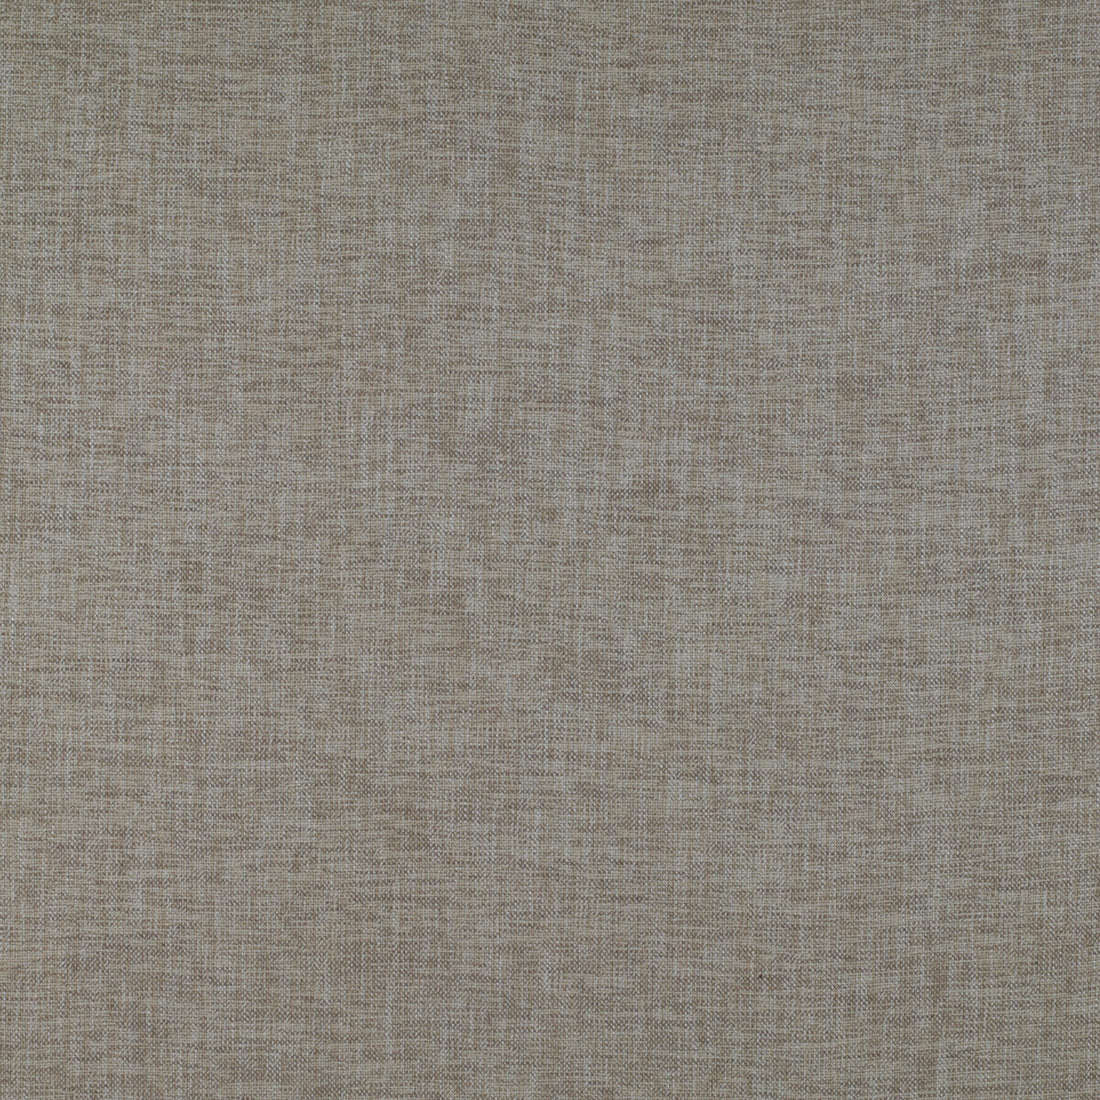 Trento fabric in crudo color - pattern GDT5320.006.0 - by Gaston y Daniela in the Tierras collection